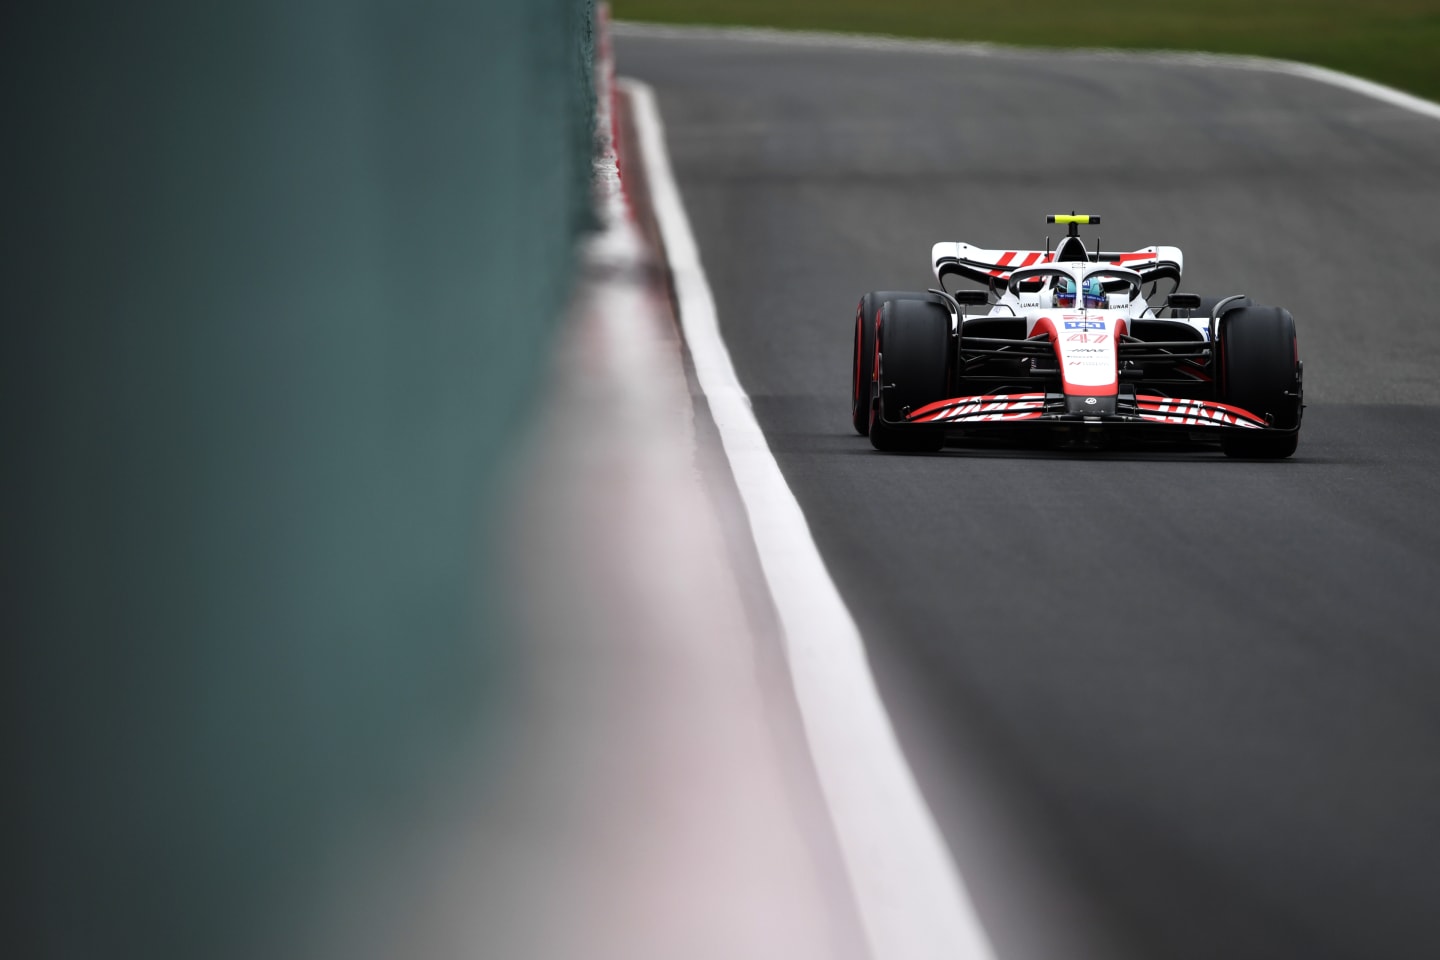 SPA, BELGIUM - AUGUST 26: Mick Schumacher of Germany driving the (47) Haas F1 VF-22 Ferrari on track during practice ahead of the F1 Grand Prix of Belgium at Circuit de Spa-Francorchamps on August 26, 2022 in Spa, Belgium. (Photo by Rudy Carezzevoli/Getty Images)